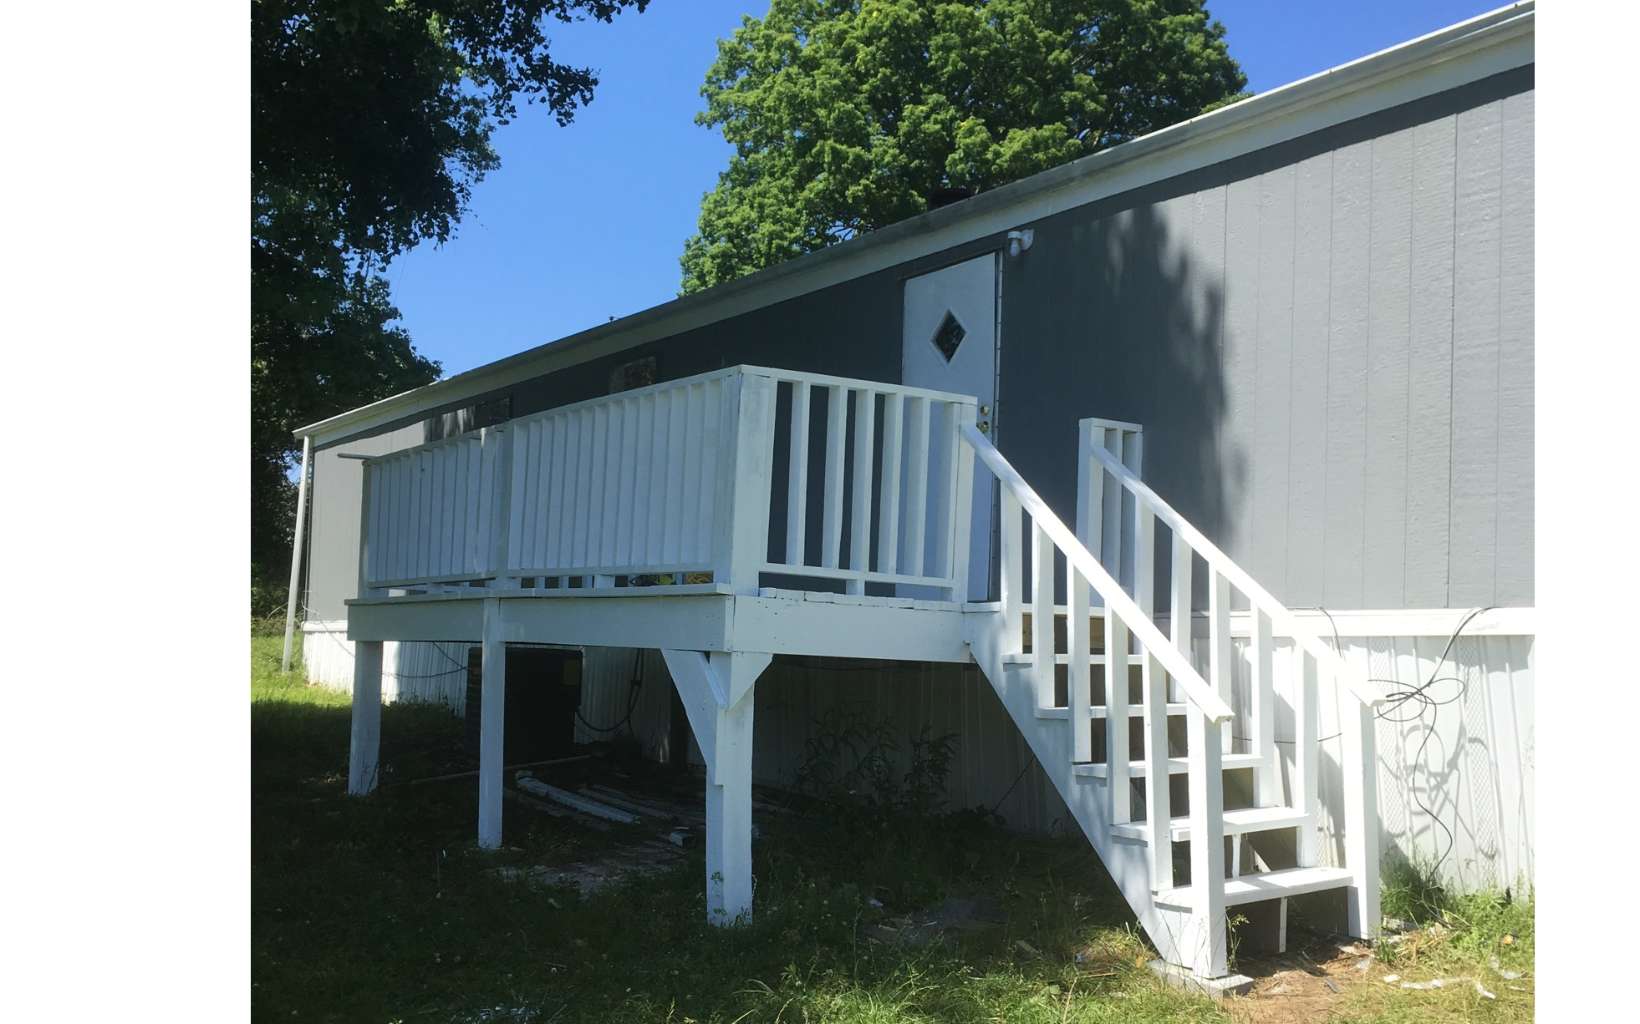 Income generating opportunity in the heart of Fannin County. This property has 4 units , 2 Double Wide and 2 Single Wide Manufactured,fully occupied with a long waiting list. Units have been updated and remodeled within the past 3 years . Current gross income is $39,900 . Landlord pays $1200 annual lawn care - all other costs are tenant expenses. This is a rare opportunity to have a positive return on investment immediately after closing. Property has easy access from both Madola Rd as well as Wash Wilson Rd. Located in a peaceful residential neighborhood convenient to both Blue Ridge and McCaysville. Each unit has public water. Appointment required to view the interior. Call listing agent Rental 1 - $925 Rental 2 - $700 Rental 3- $950 Rental 4- $750